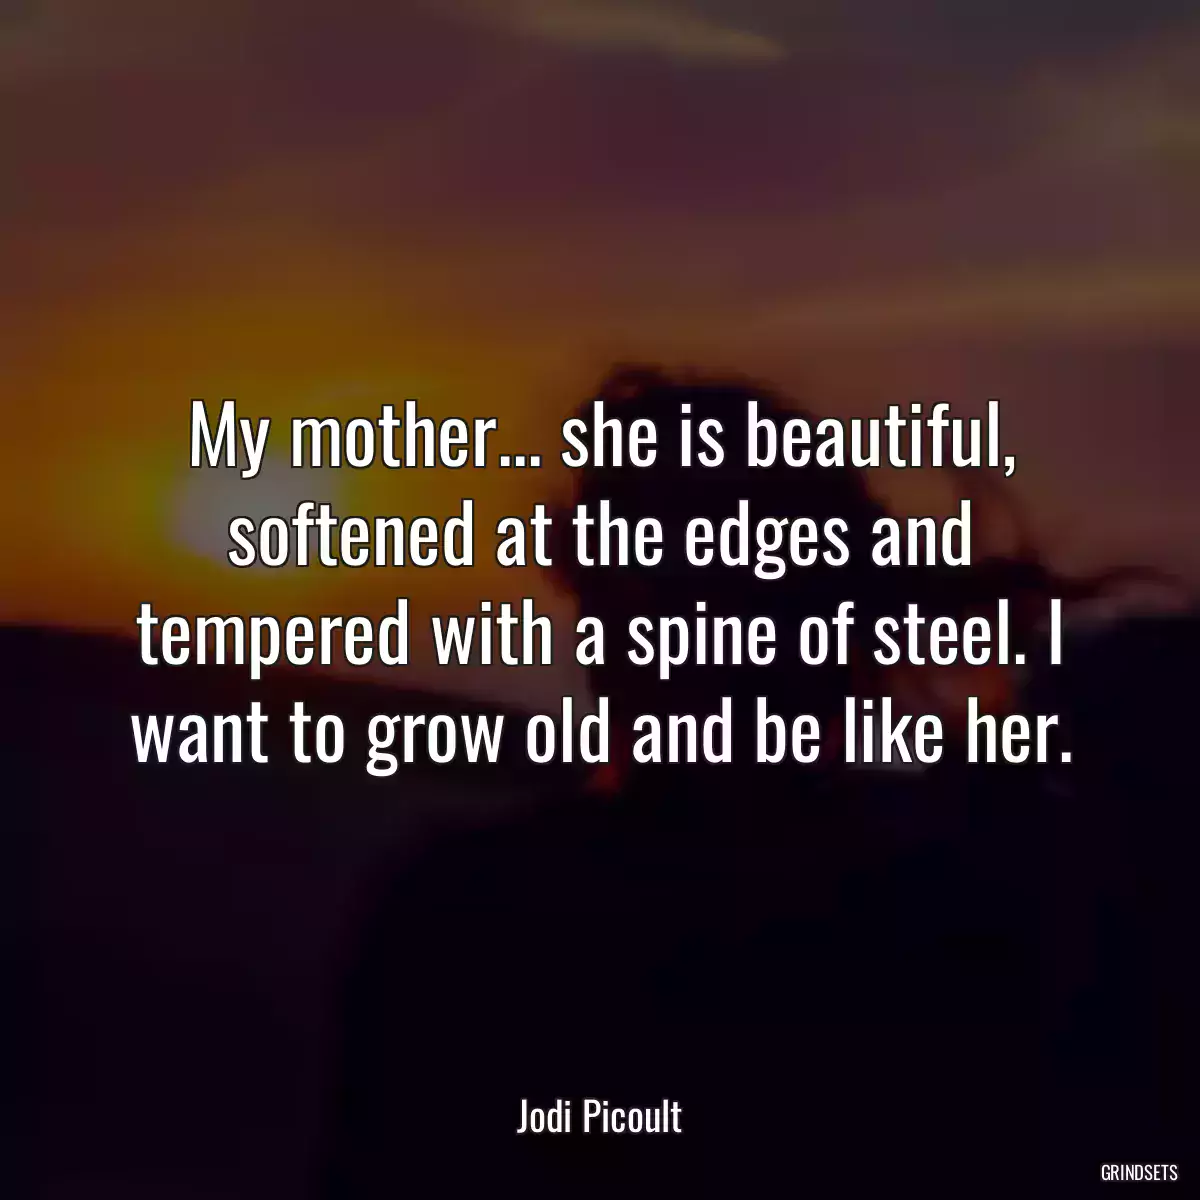 My mother... she is beautiful, softened at the edges and tempered with a spine of steel. I want to grow old and be like her.